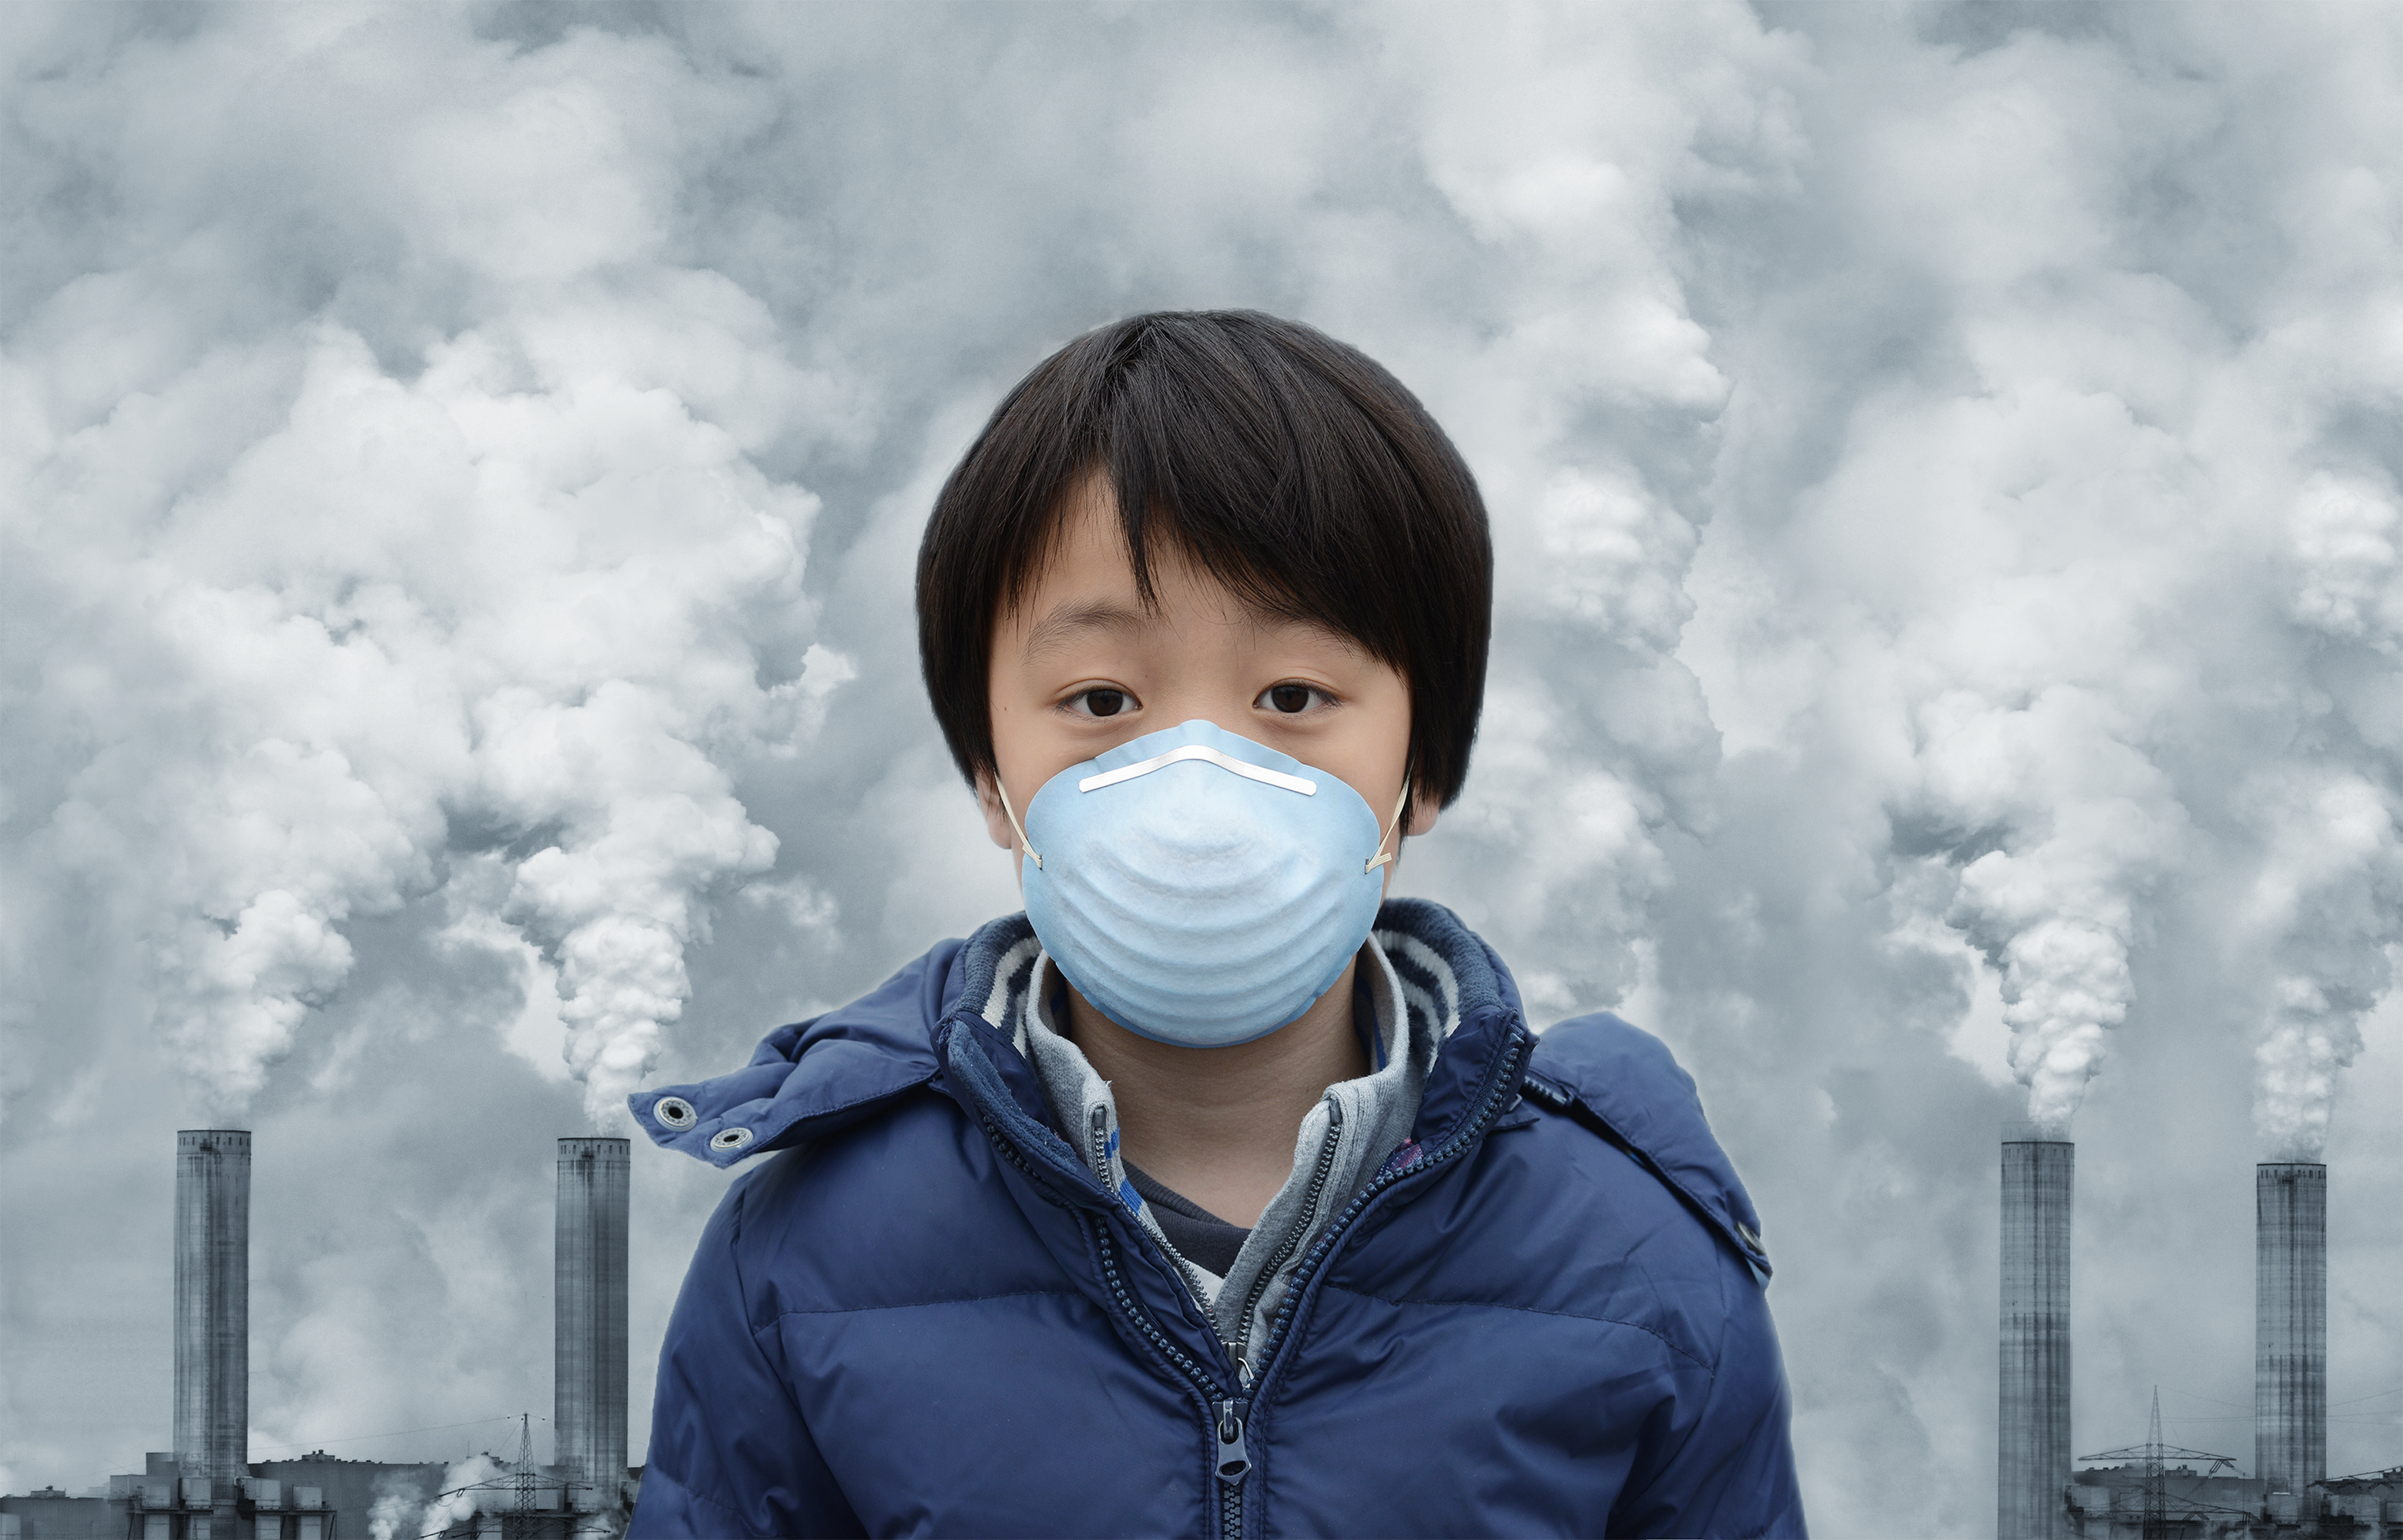 An image of a youth in front of a polluted sky.